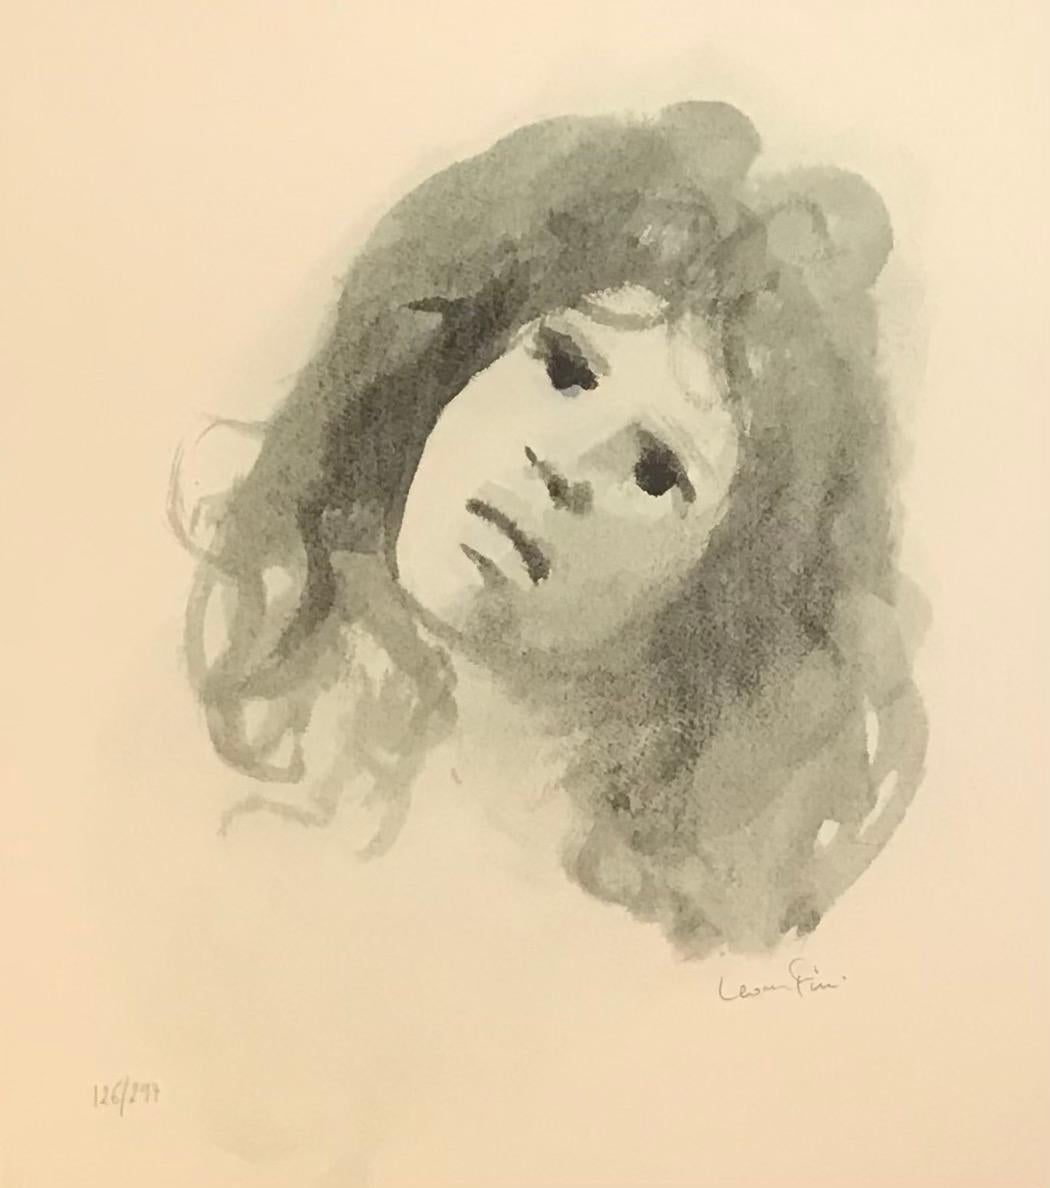 Edition 126 of 297
1 copy
Work on paper
Light brown wooden frame with glass pane
68 x 55 x 1,5 cm

Leonor Fini, pseudonym of Eleonor Fini, born in Buenos Aires (Argentina) on August 30, 1908 (or 1907 for some sources) and died in Paris on January